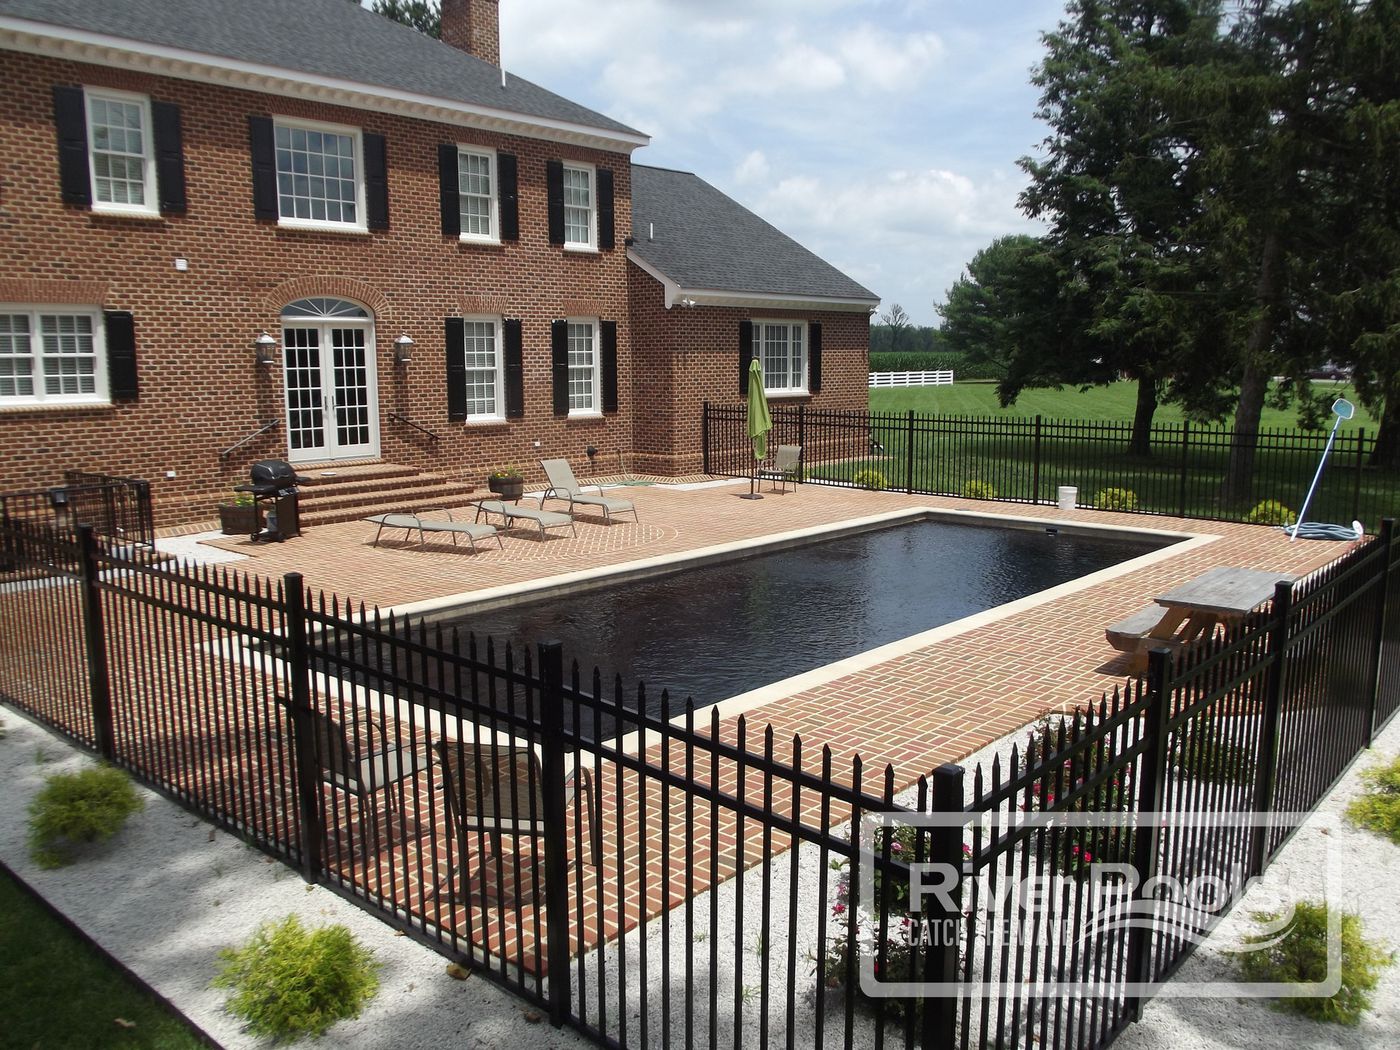 Small Pools 101: Shapes, Dimensions, Features And Other Considerations